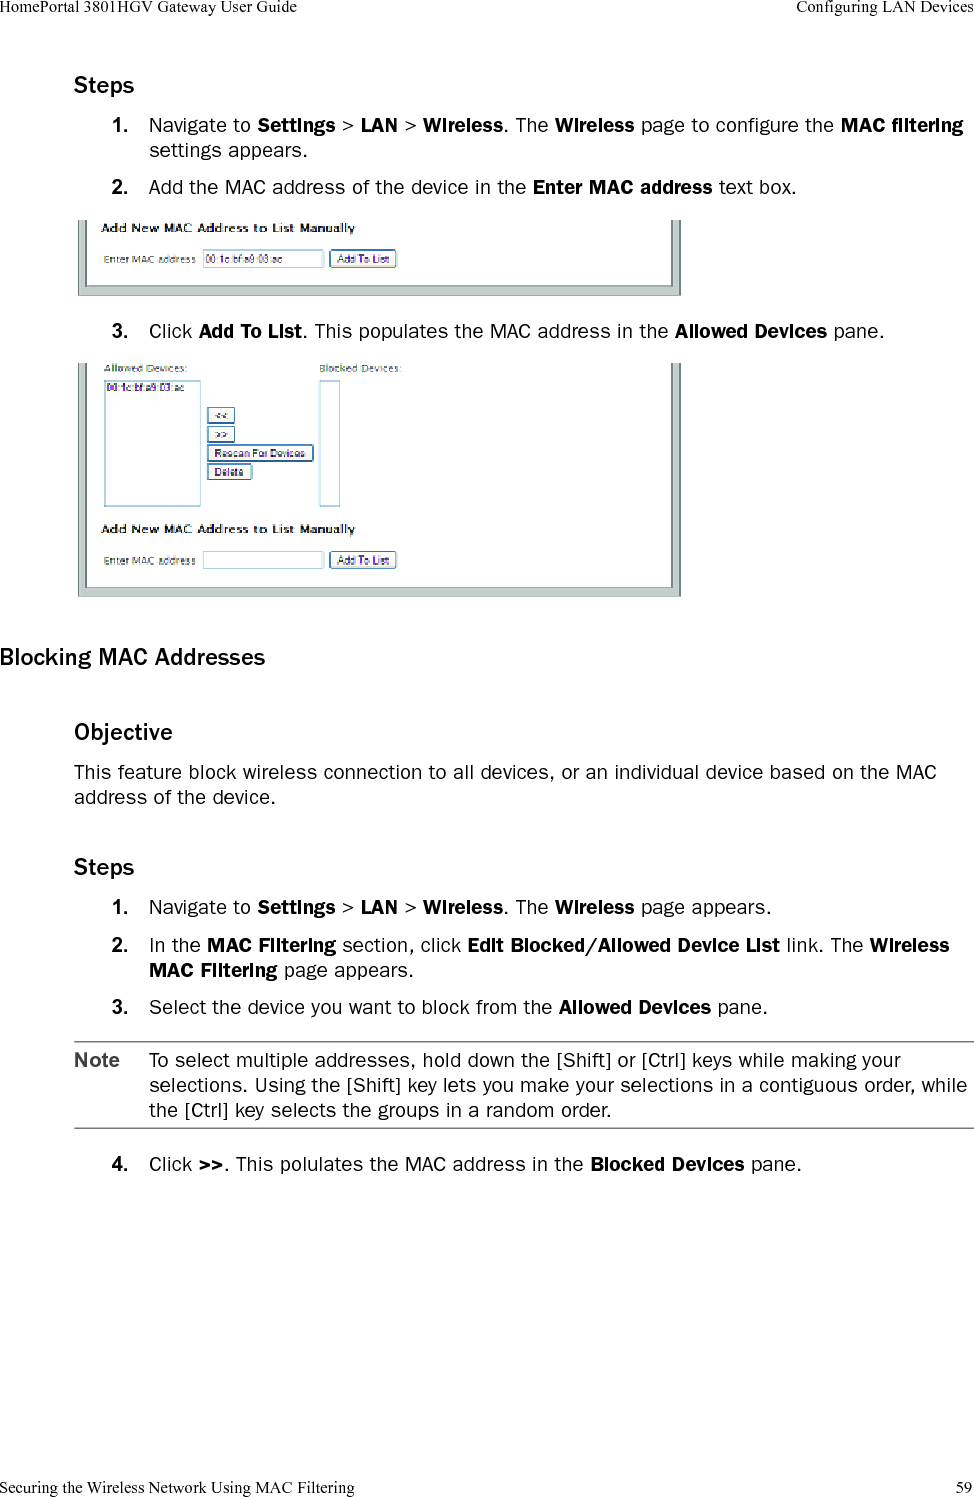 Securing the Wireless Network Using MAC Filtering 59HomePortal 3801HGV Gateway User Guide Configuring LAN DevicesSteps1. Navigate to Settings &gt; LAN &gt; Wireless. The Wireless page to configure the MAC filtering settings appears. 2. Add the MAC address of the device in the Enter MAC address text box.3. Click Add To List. This populates the MAC address in the Allowed Devices pane.Blocking MAC AddressesObjectiveThis feature block wireless connection to all devices, or an individual device based on the MAC address of the device. Steps1. Navigate to Settings &gt; LAN &gt; Wireless. The Wireless page appears.2. In the MAC Filtering section, click Edit Blocked/Allowed Device List link. The Wireless MAC Filtering page appears.3. Select the device you want to block from the Allowed Devices pane.Note To select multiple addresses, hold down the [Shift] or [Ctrl] keys while making your selections. Using the [Shift] key lets you make your selections in a contiguous order, while the [Ctrl] key selects the groups in a random order.4. Click &gt;&gt;. This polulates the MAC address in the Blocked Devices pane.